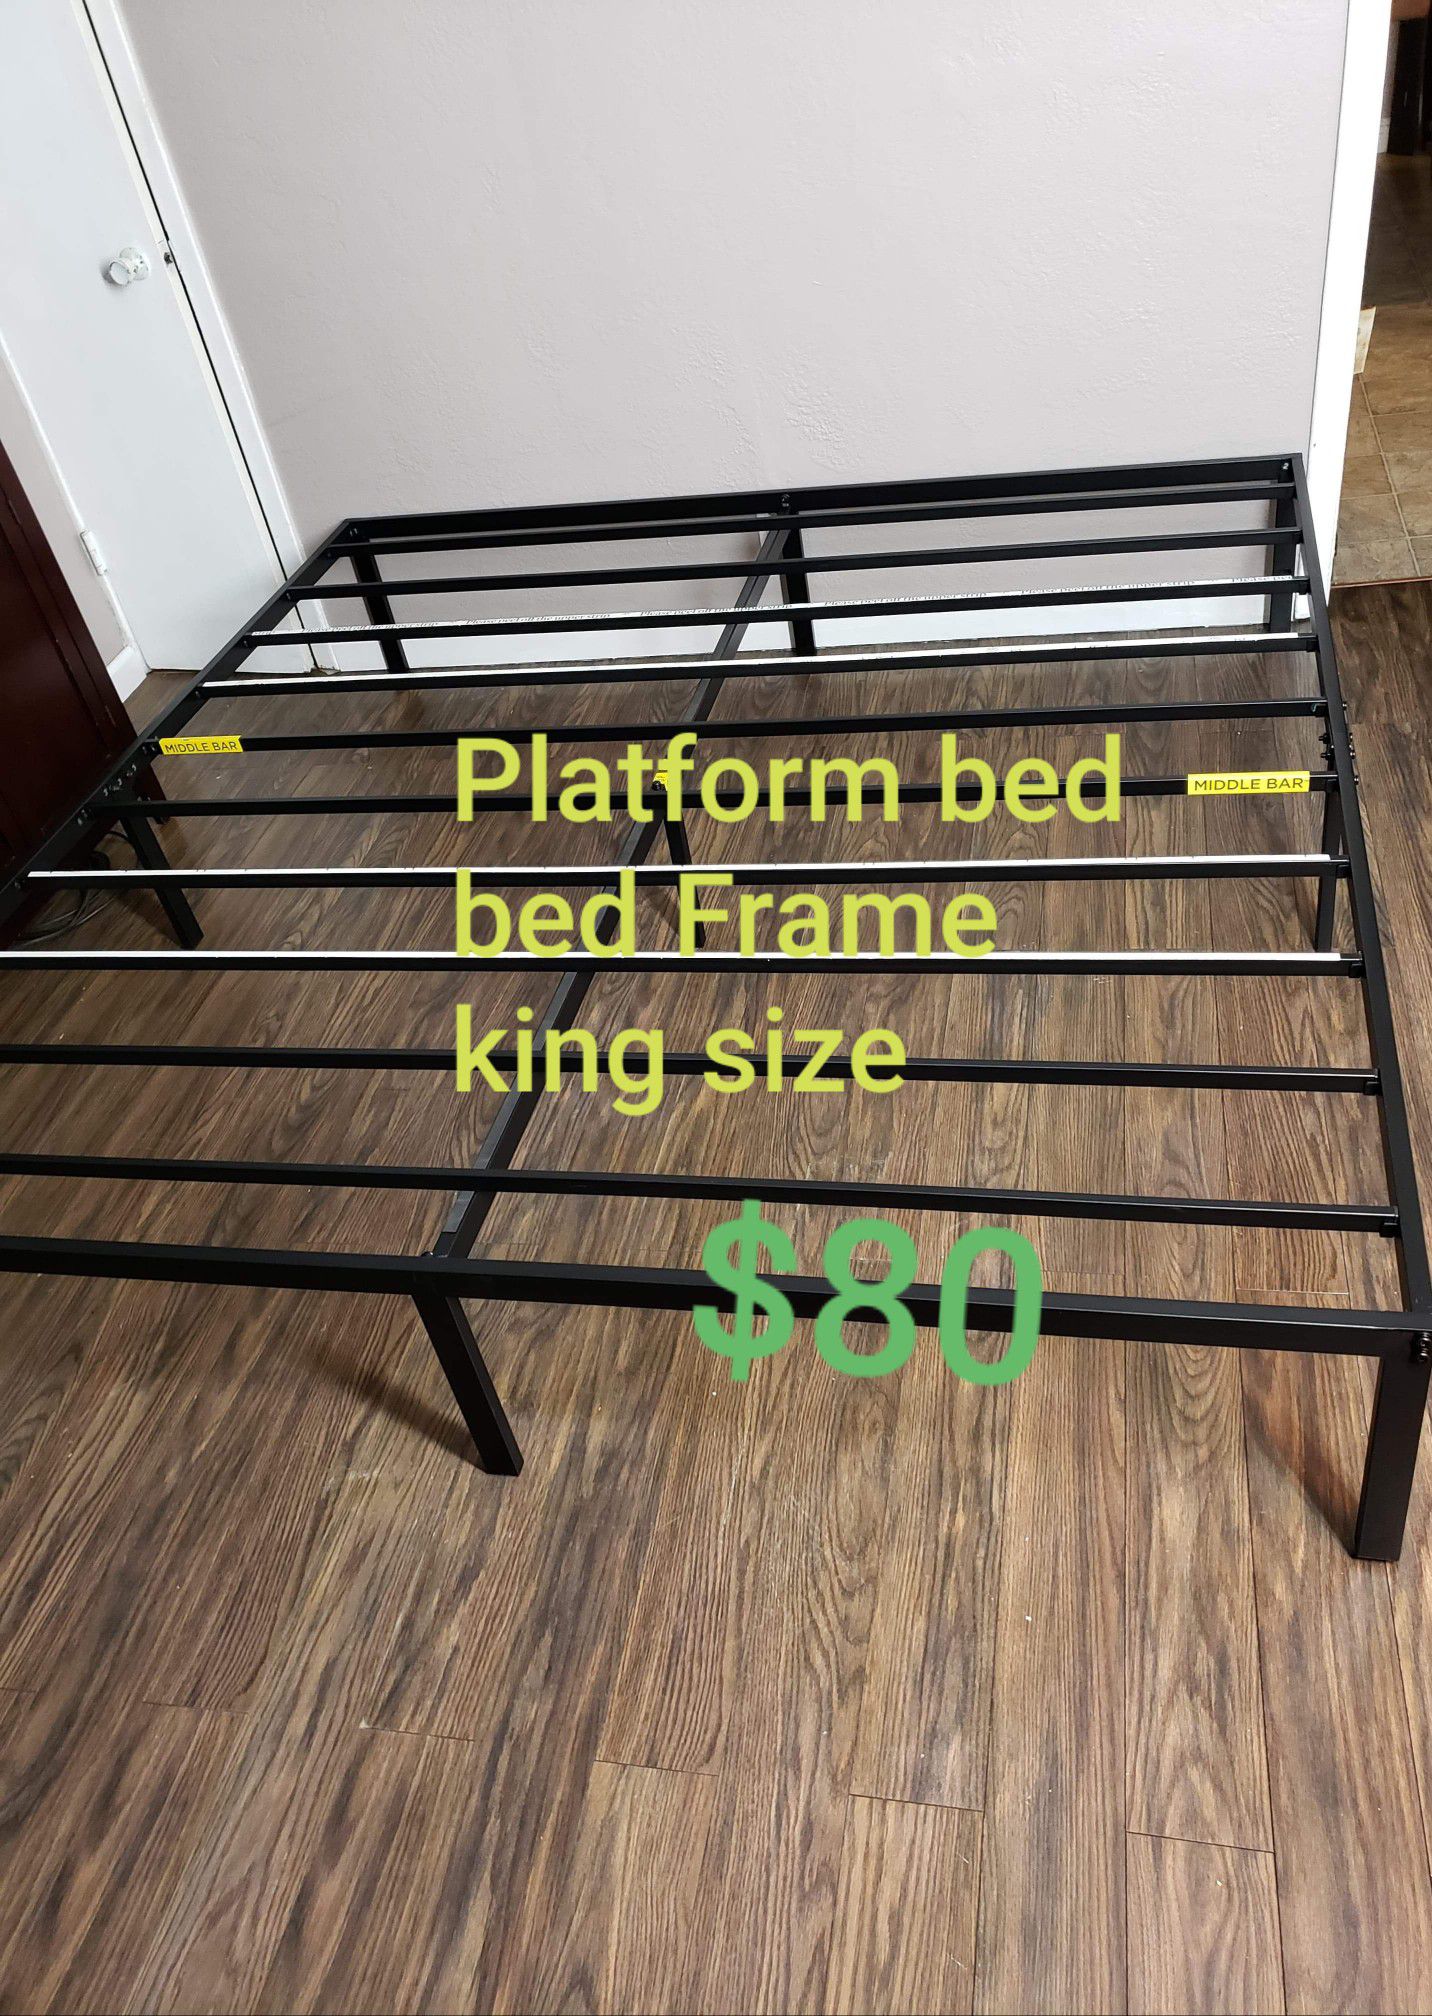 Platform bed frame king size. 14" Tall. New. Free delivery.